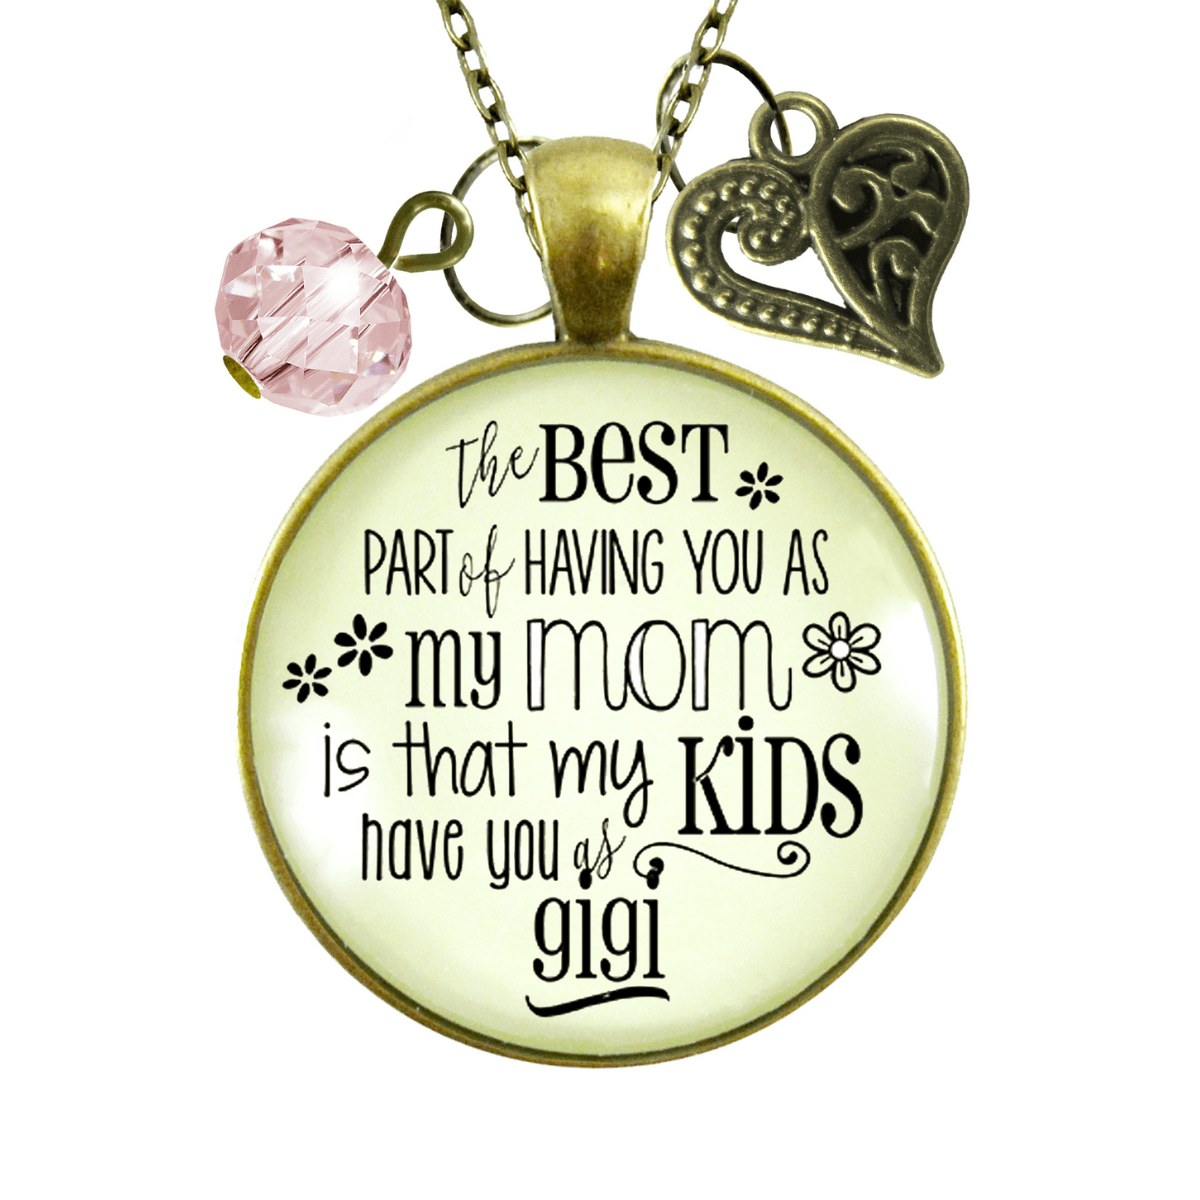 Gutsy Goodness Mimi Necklace Best Part You as Mom Kids Grandma Jewelry Gift Daughter - Gutsy Goodness Handmade Jewelry;Mimi Necklace Best Part You As Mom Kids Grandma Jewelry Gift Daughter - Gutsy Goodness Handmade Jewelry Gifts